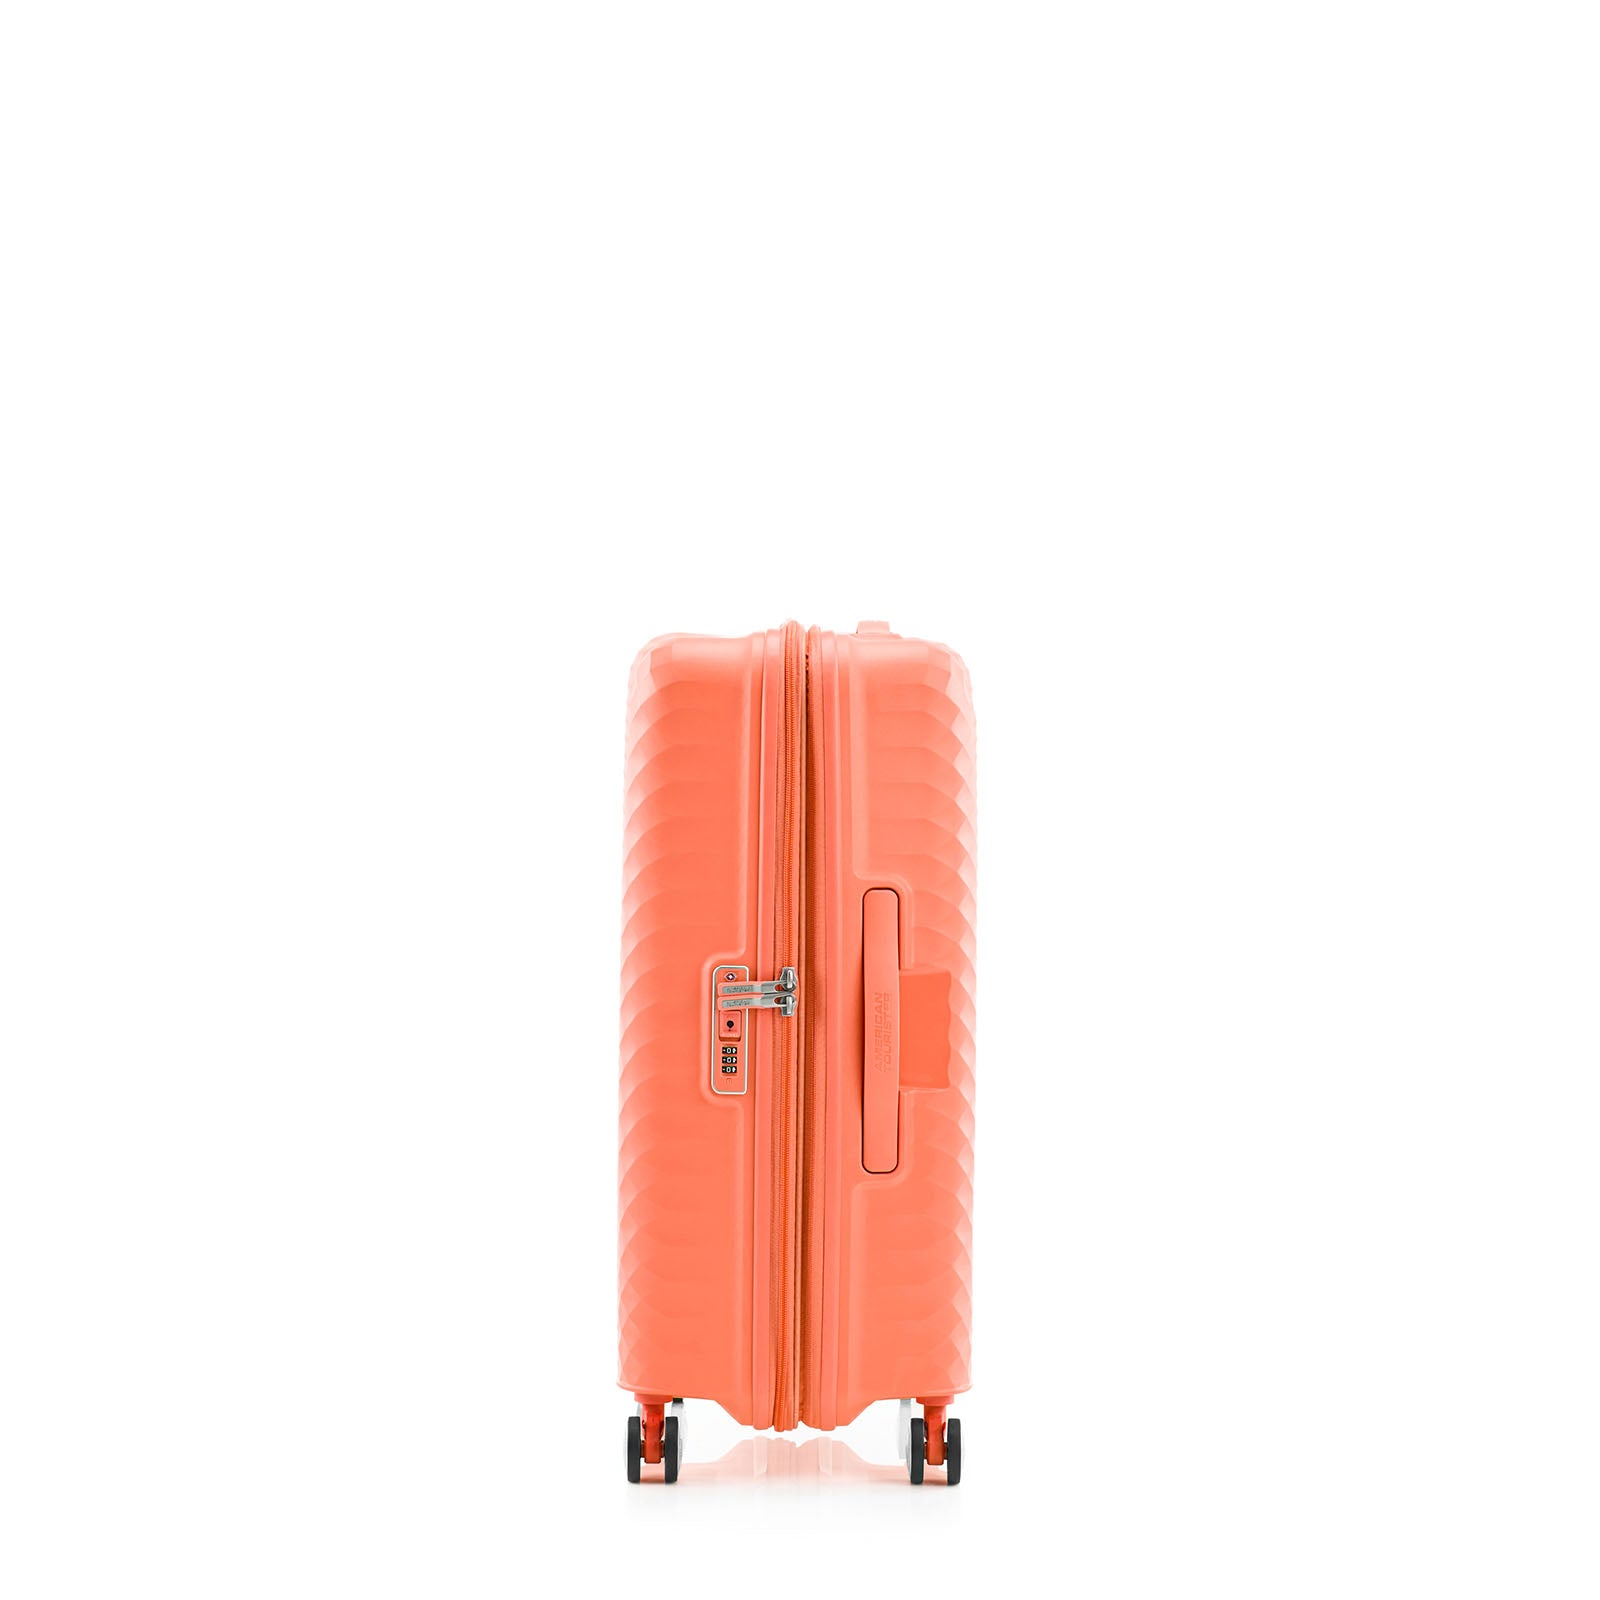 American-Tourister-Squasem-66cm-Suitcase-Bright-Coral-Side-Handle